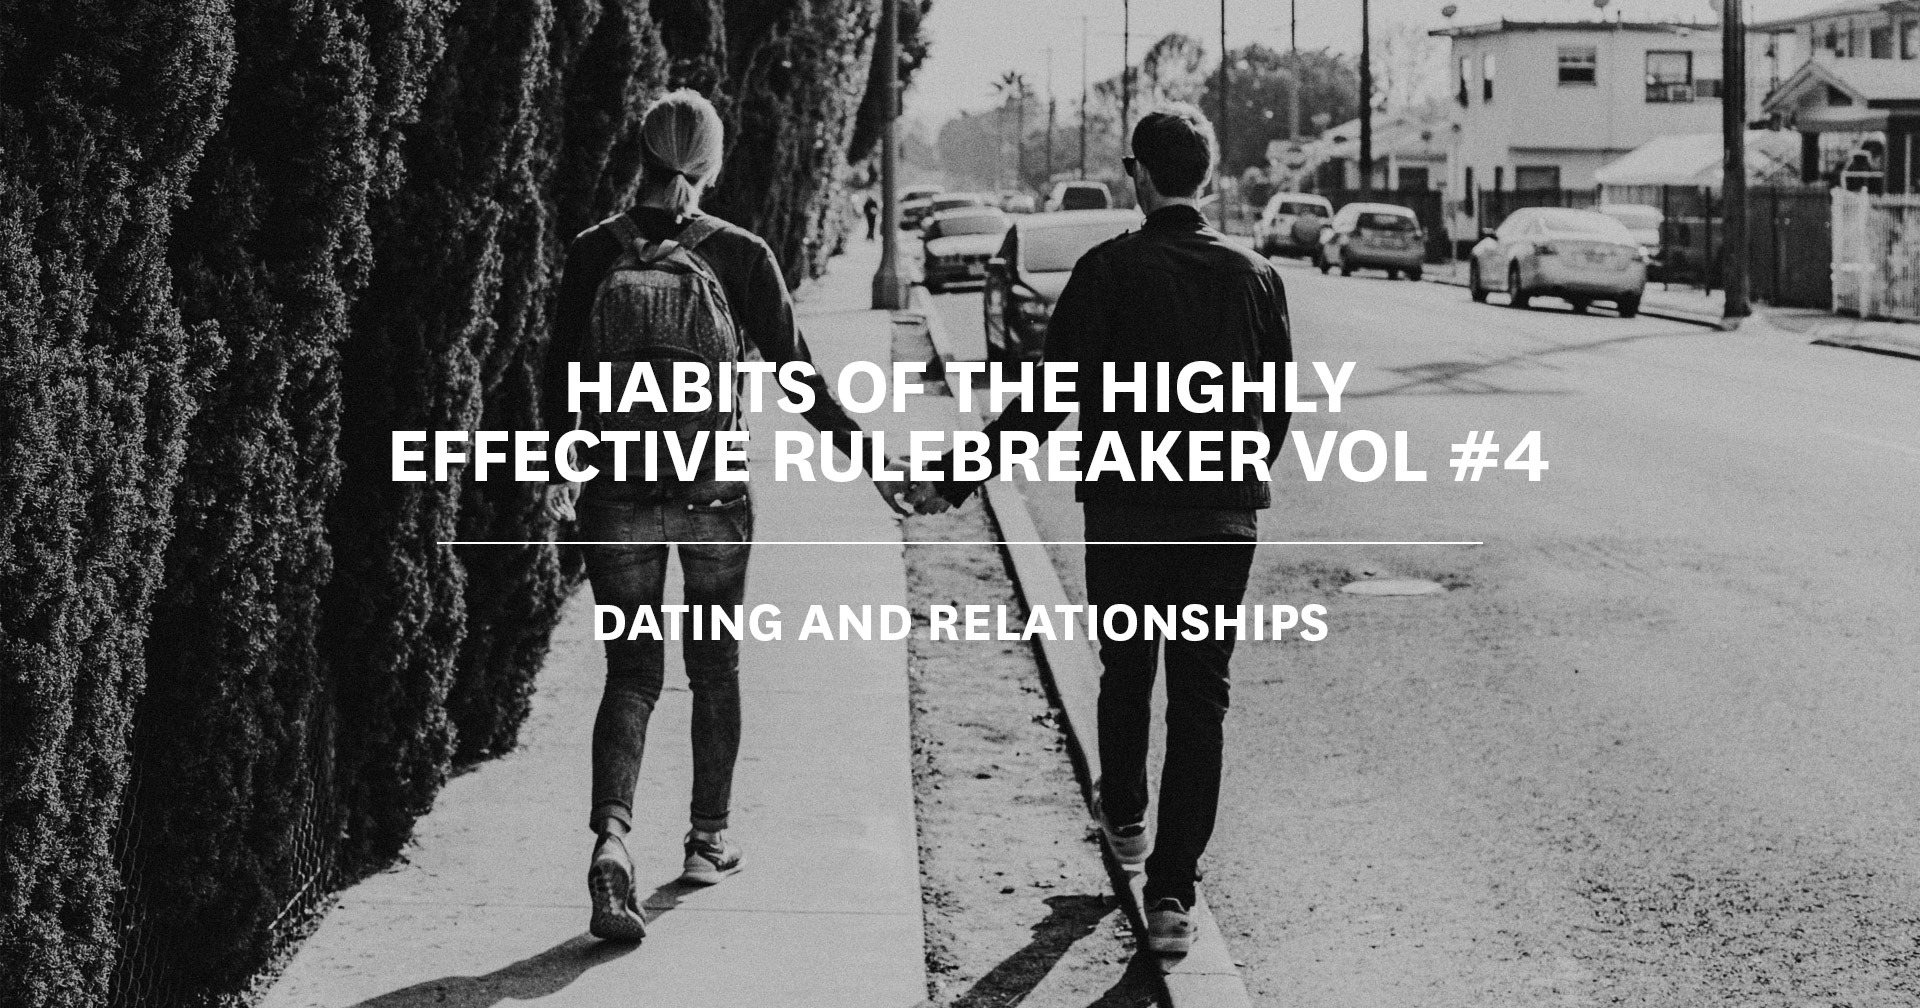 The Habits of the Highly Effective Rulebreaker Vol #4: Dating and Relationships